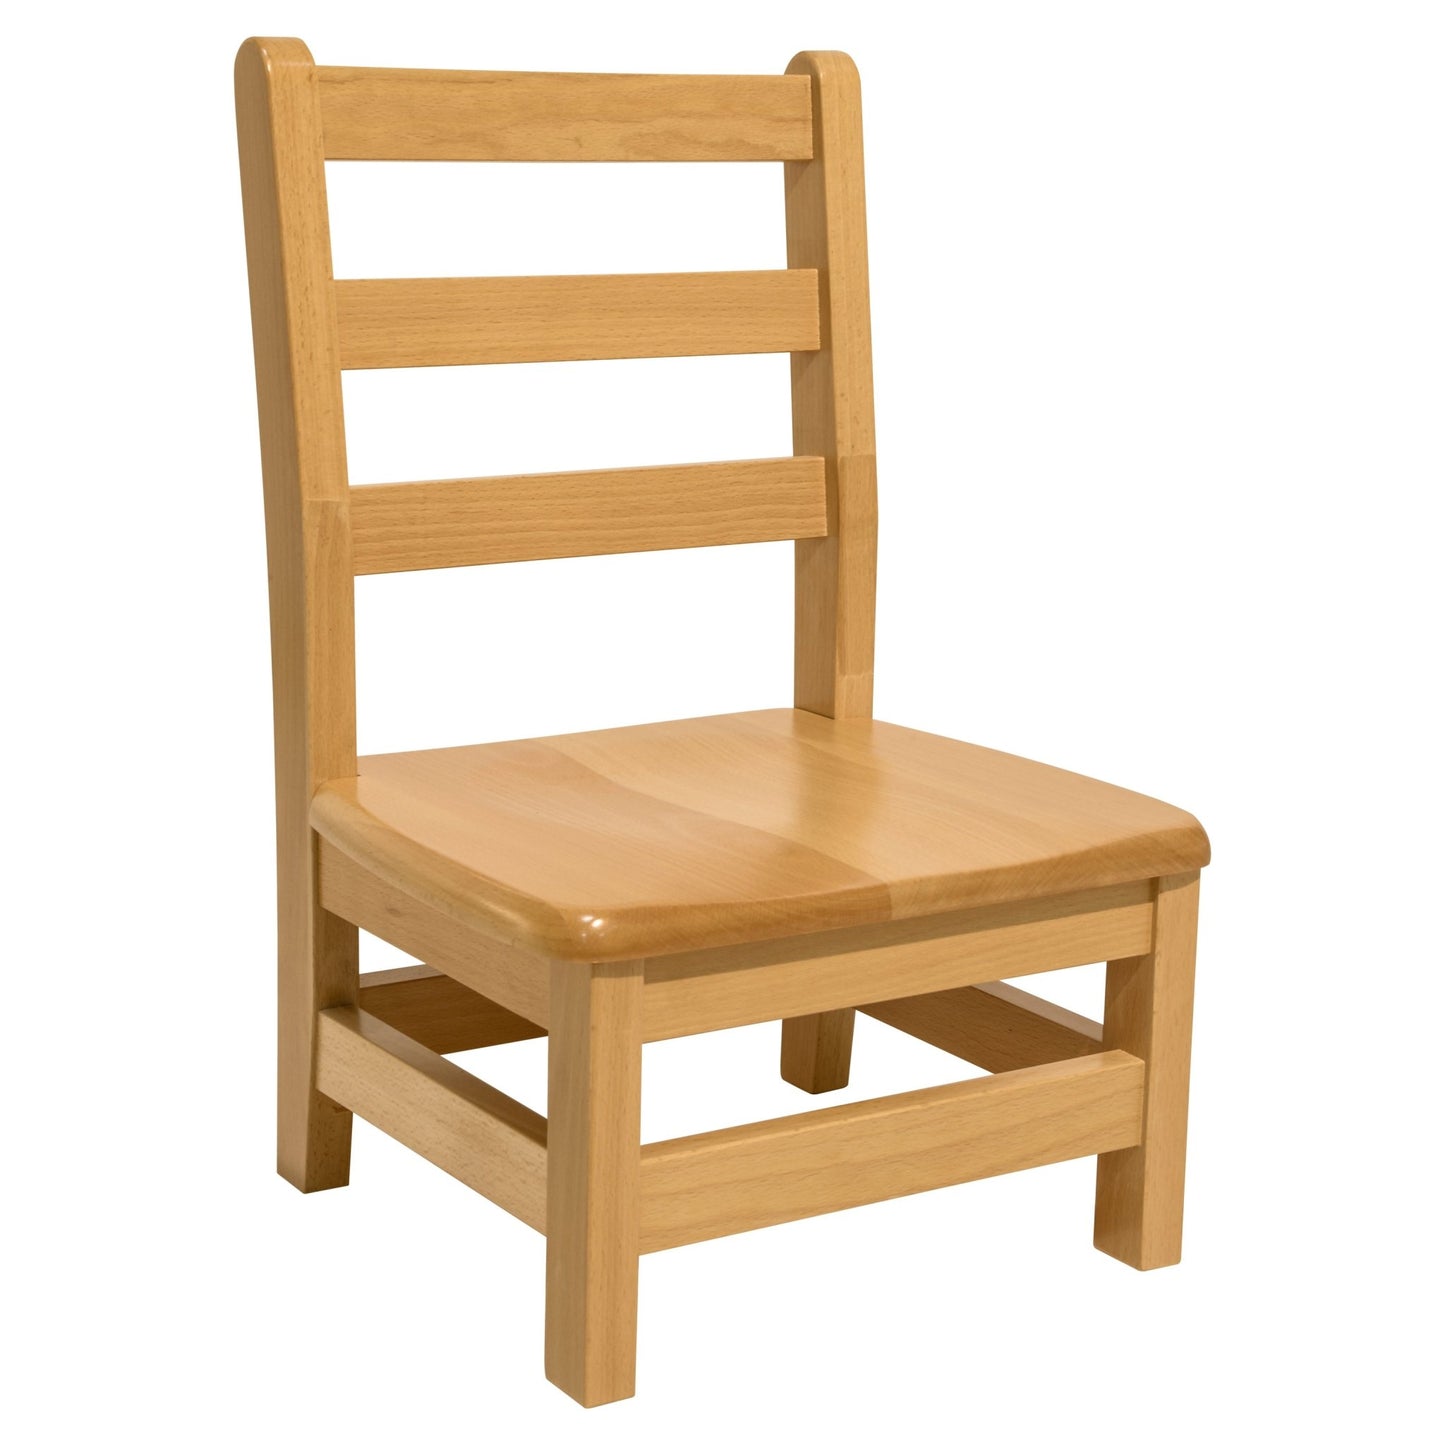 Wood Designs 12" Chair, Carton of (2) - (81202) - SchoolOutlet